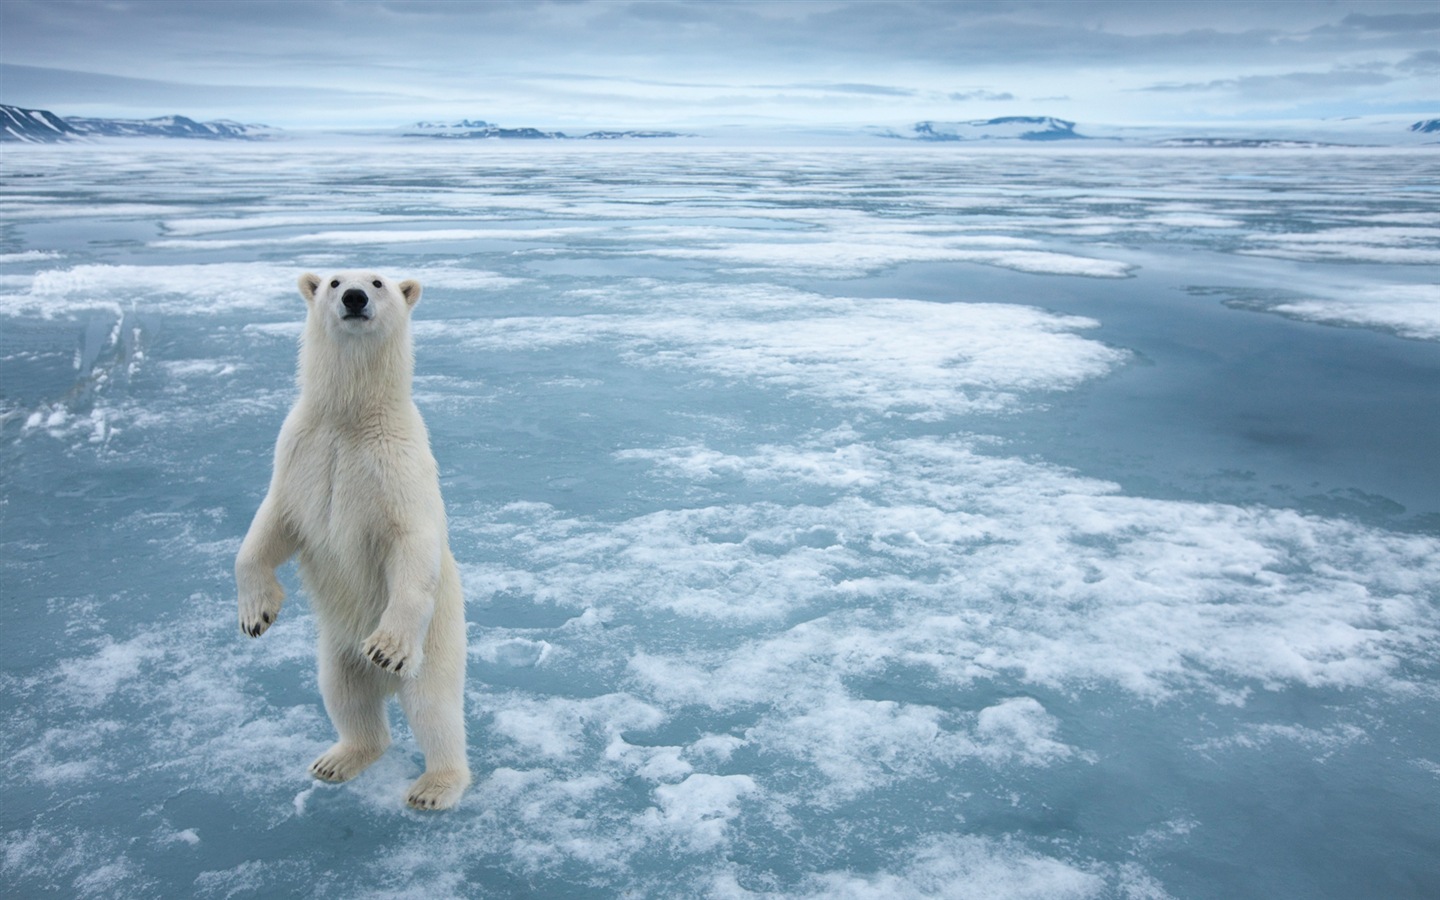 Windows 8 Wallpapers: Arctic, the nature ecological landscape, arctic animals #6 - 1440x900